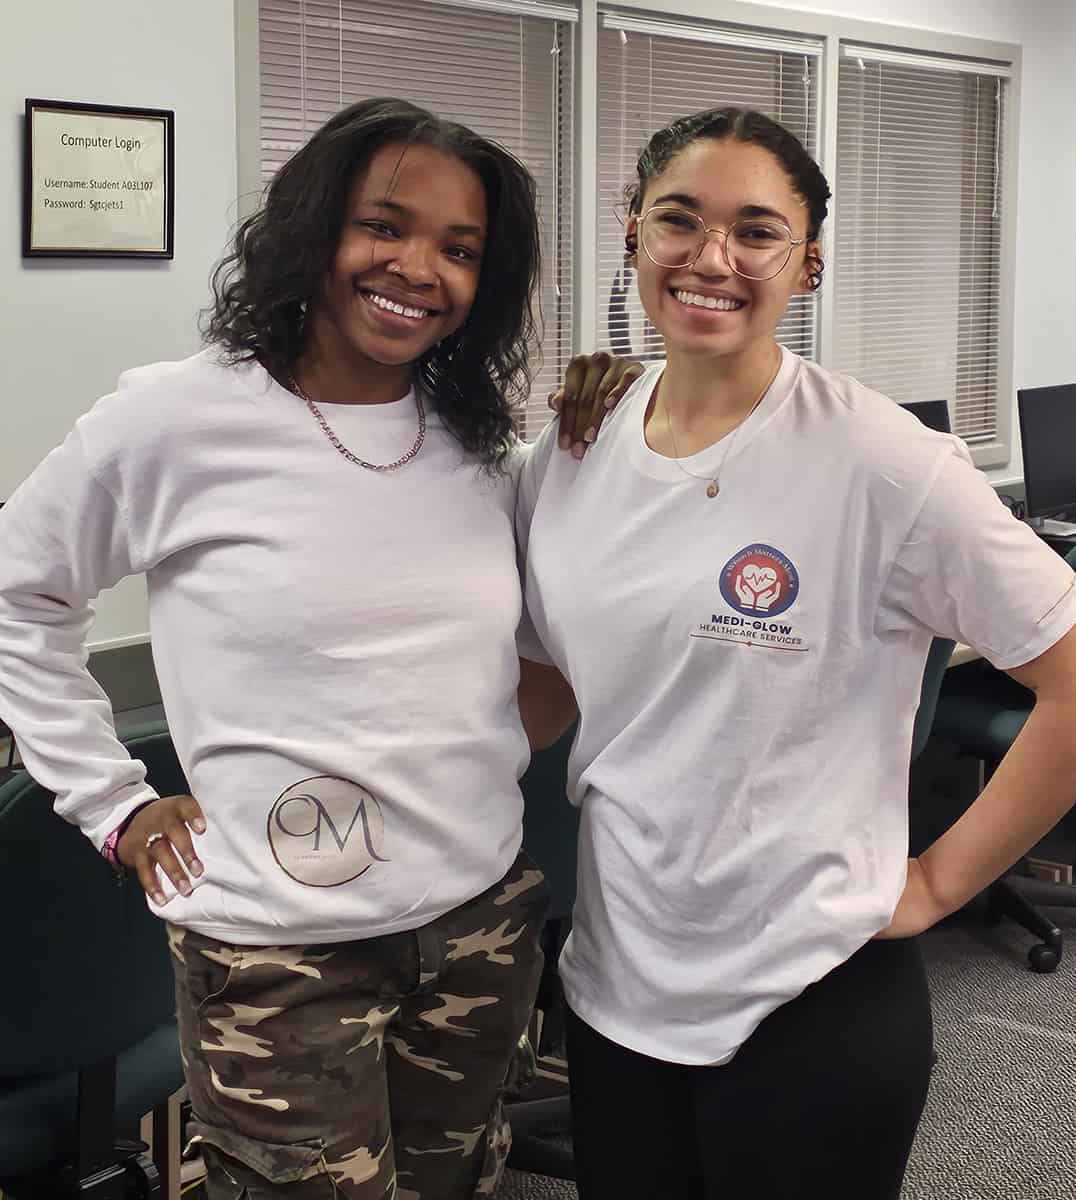 SGTC Marketing students Kaitlin Champion and Leah Nunley are shown above wearing apparel with logos they created for their future businesses.